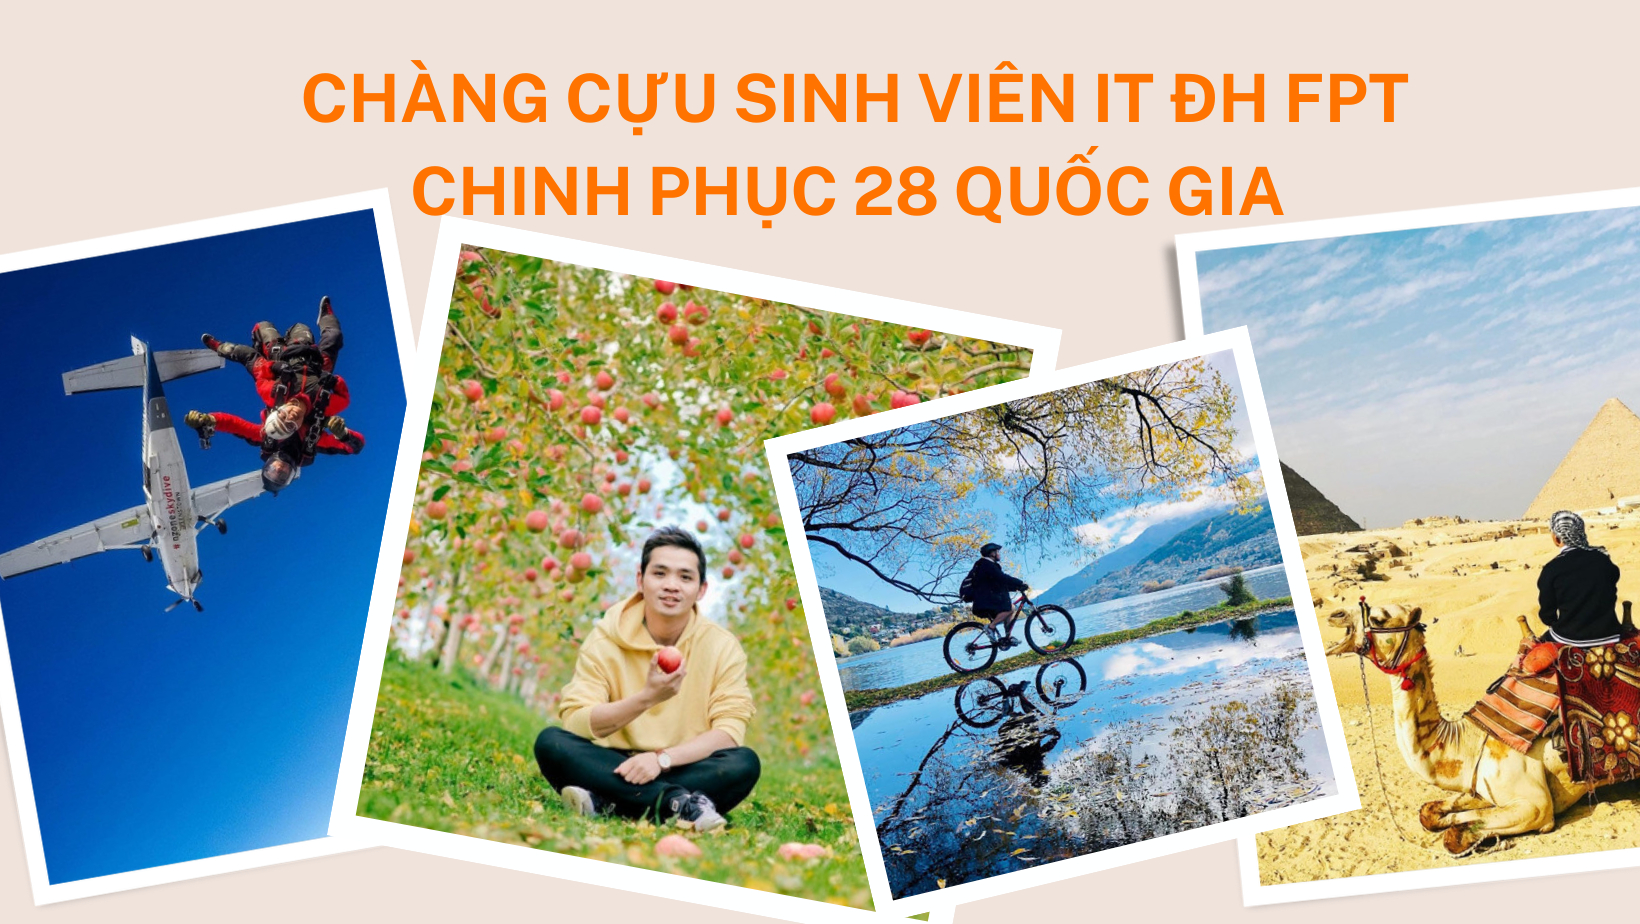 cuu sinh vien it dhfpt chinh phuc 28 quoc gia 0 1660535219